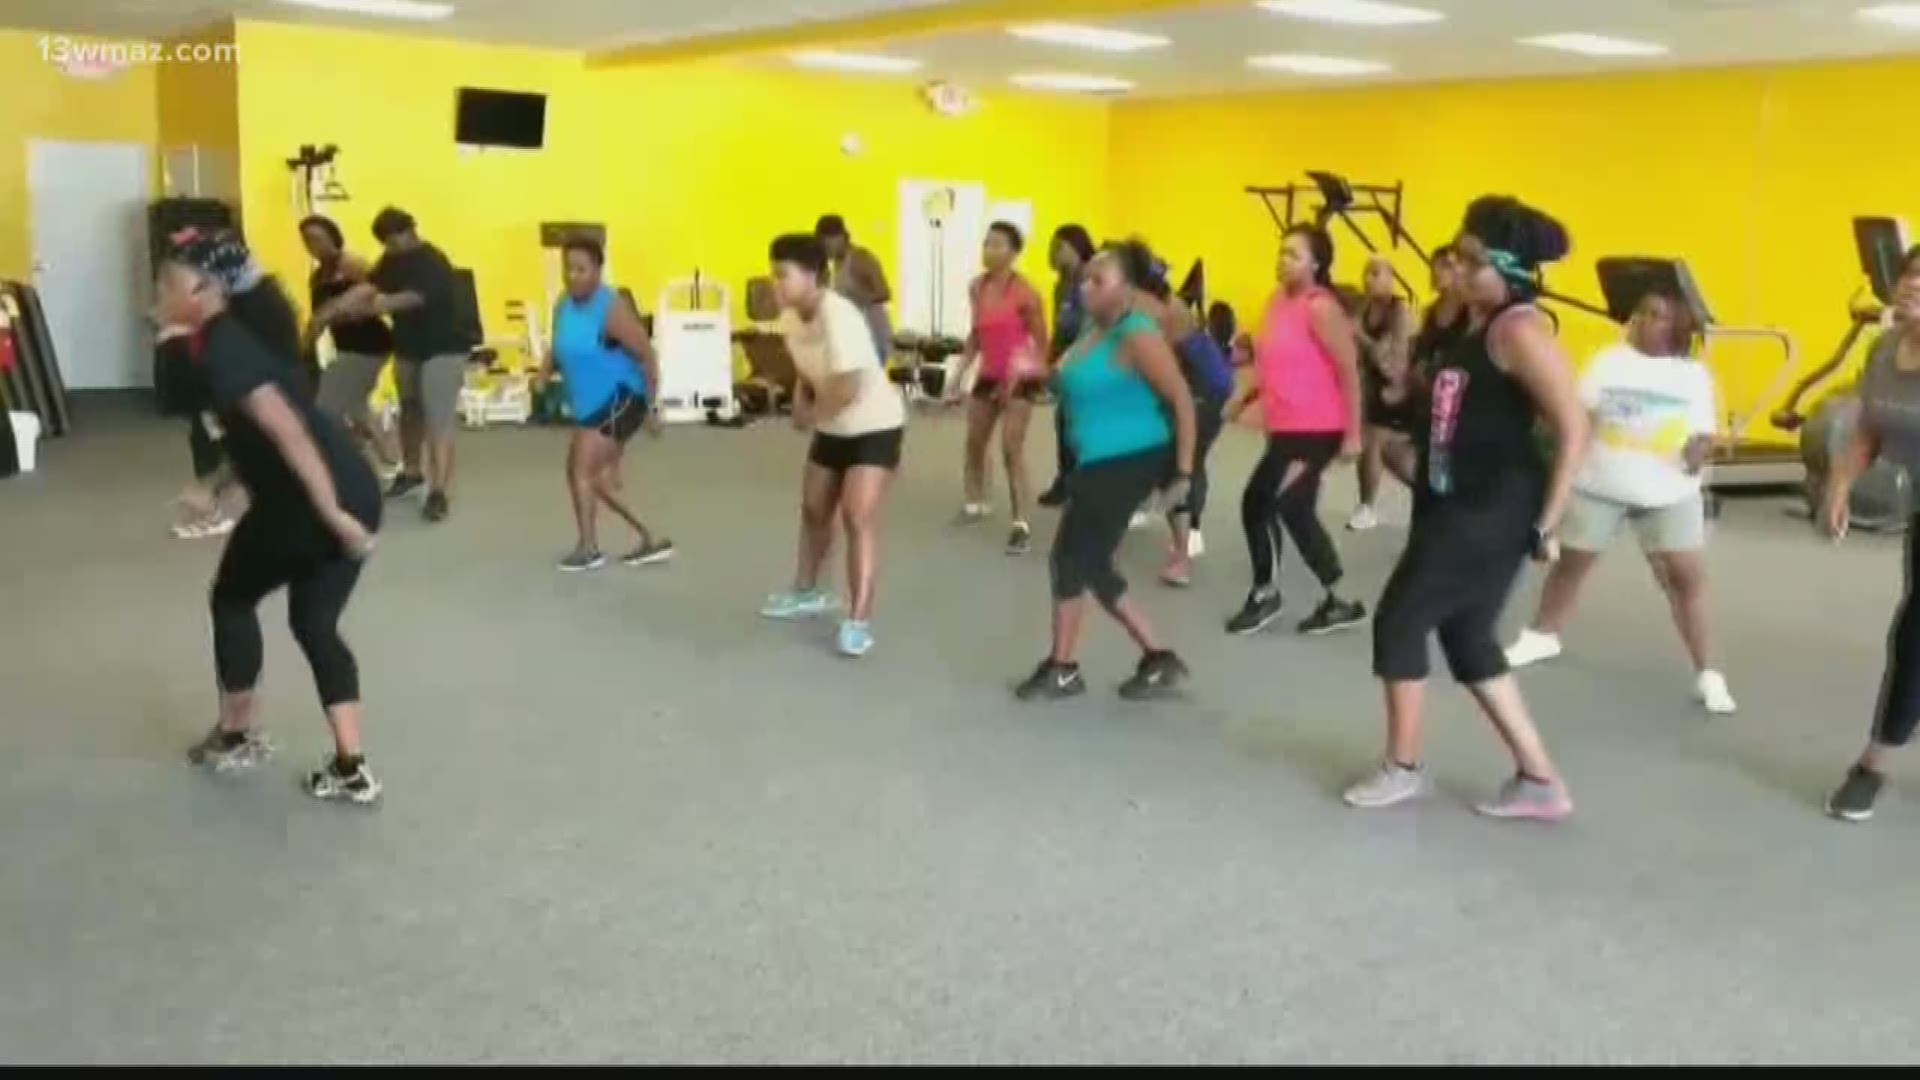 It's time to get Amped Up with Dee Henry and she wants you to join her in a dance challenge for the Georgia Peach Festival. If you're used to the normal gym routine, this will definitely be something different to get your body moving.